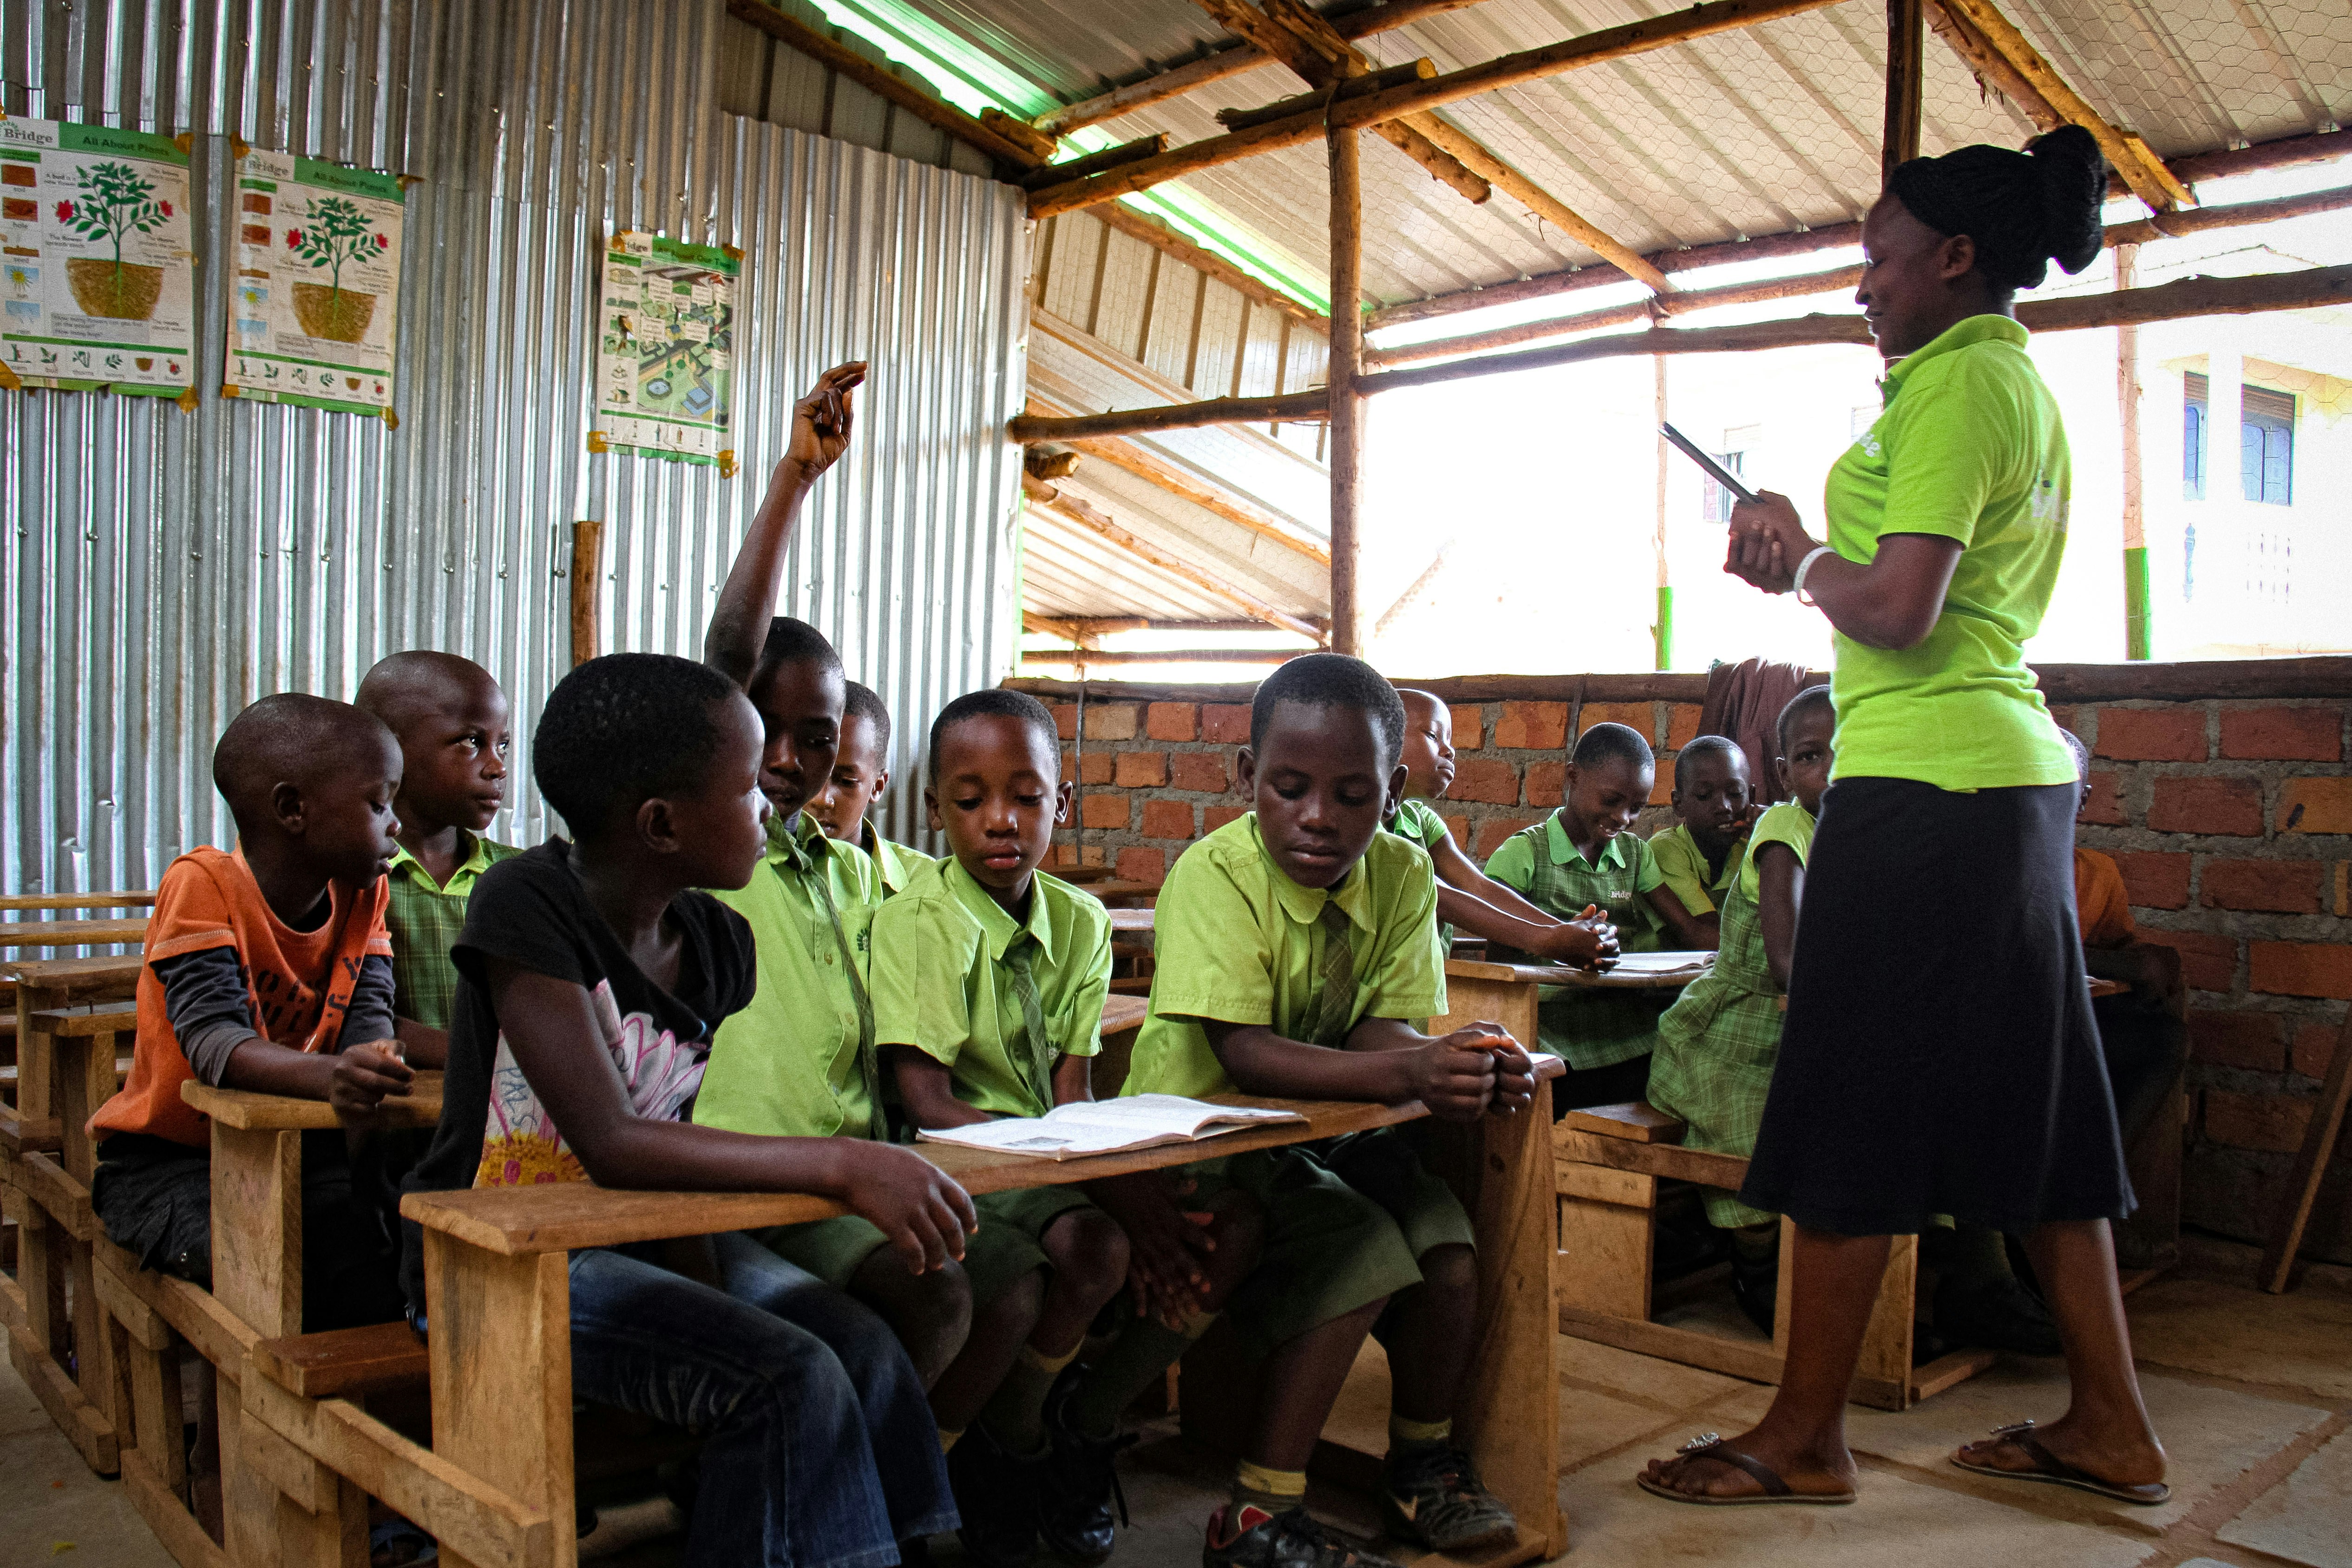 A teacher conducts a class at the Bridge International Academies on November 5, 2016 in Nsumbi, in the suburbs of Kampala. Uganda's High Court on November 4 ordered the closure of a chain of low-cost private schools backed by Microsoft and Facebook founders Bill Gates and Mark Zuckerberg. Judge Patricia Basaza Wasswa ruled the 63 Bridge International Academies provided unsanitary learning conditions, used unqualified teachers and were not properly licensed.  / AFP / GAEL GRILHOT        (Photo credit should read GAEL GRILHOT/AFP via Getty Images)